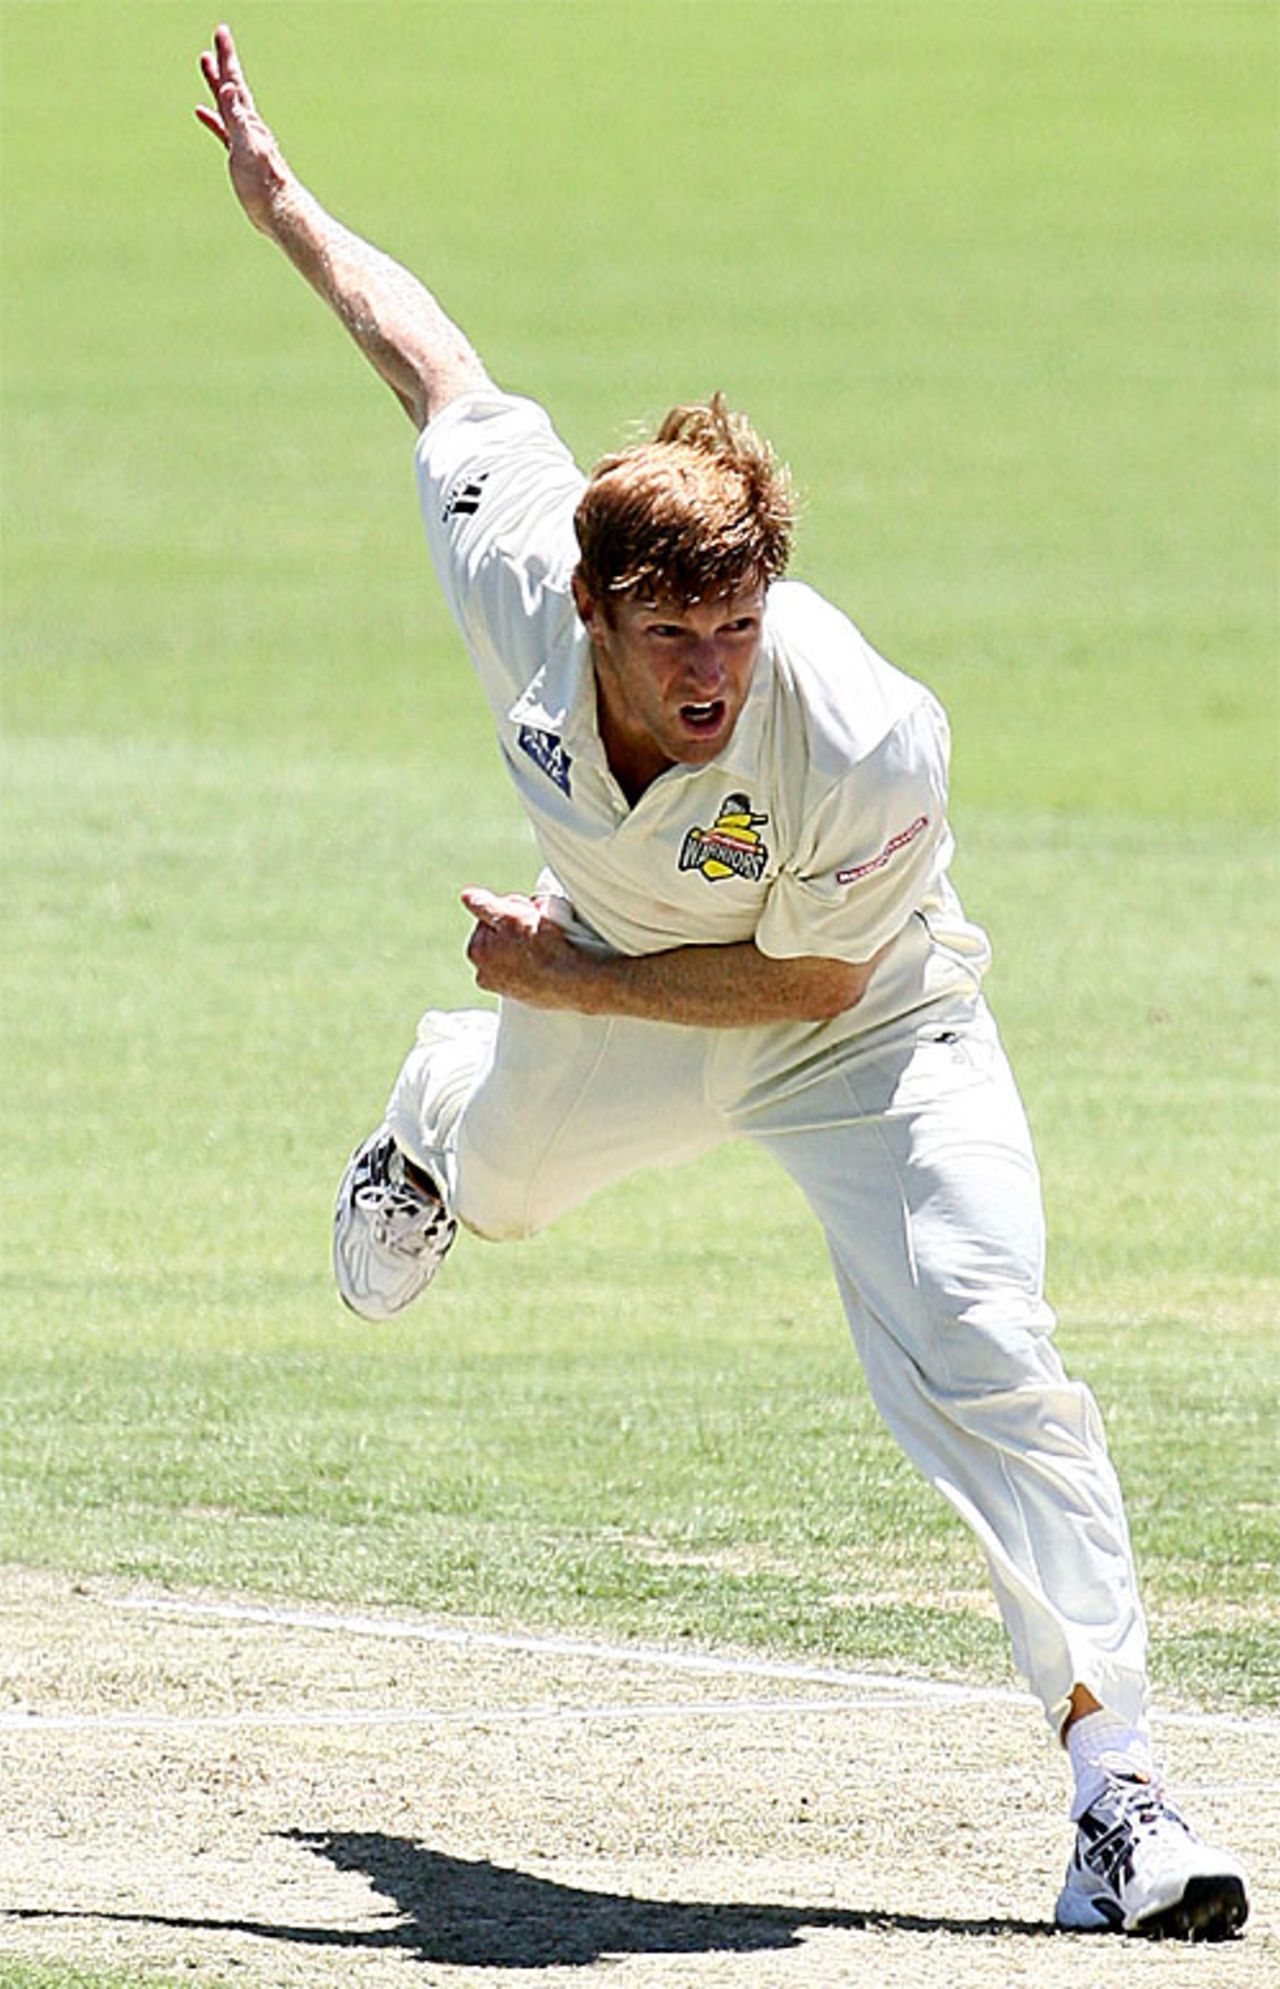 Mathew Inness caused trouble for South Australia on the opening day, Western Australia v South Australia, Pura Cup, Perth, December 14, 2007